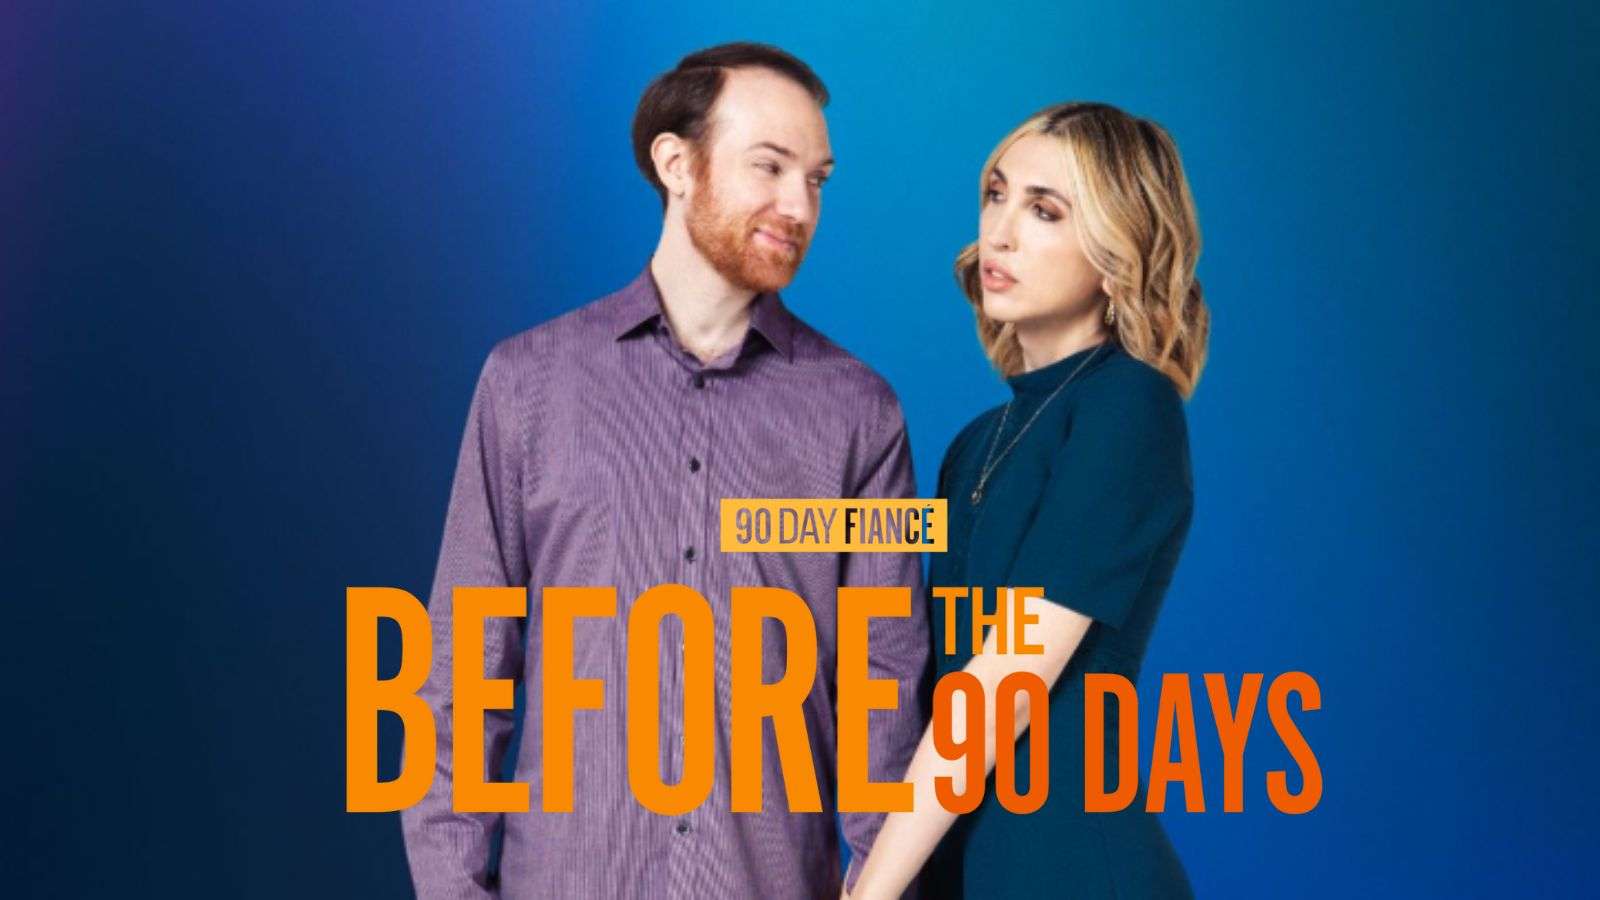 Christian and Chloe from 90 Day Fiancé: Before the 90 Days